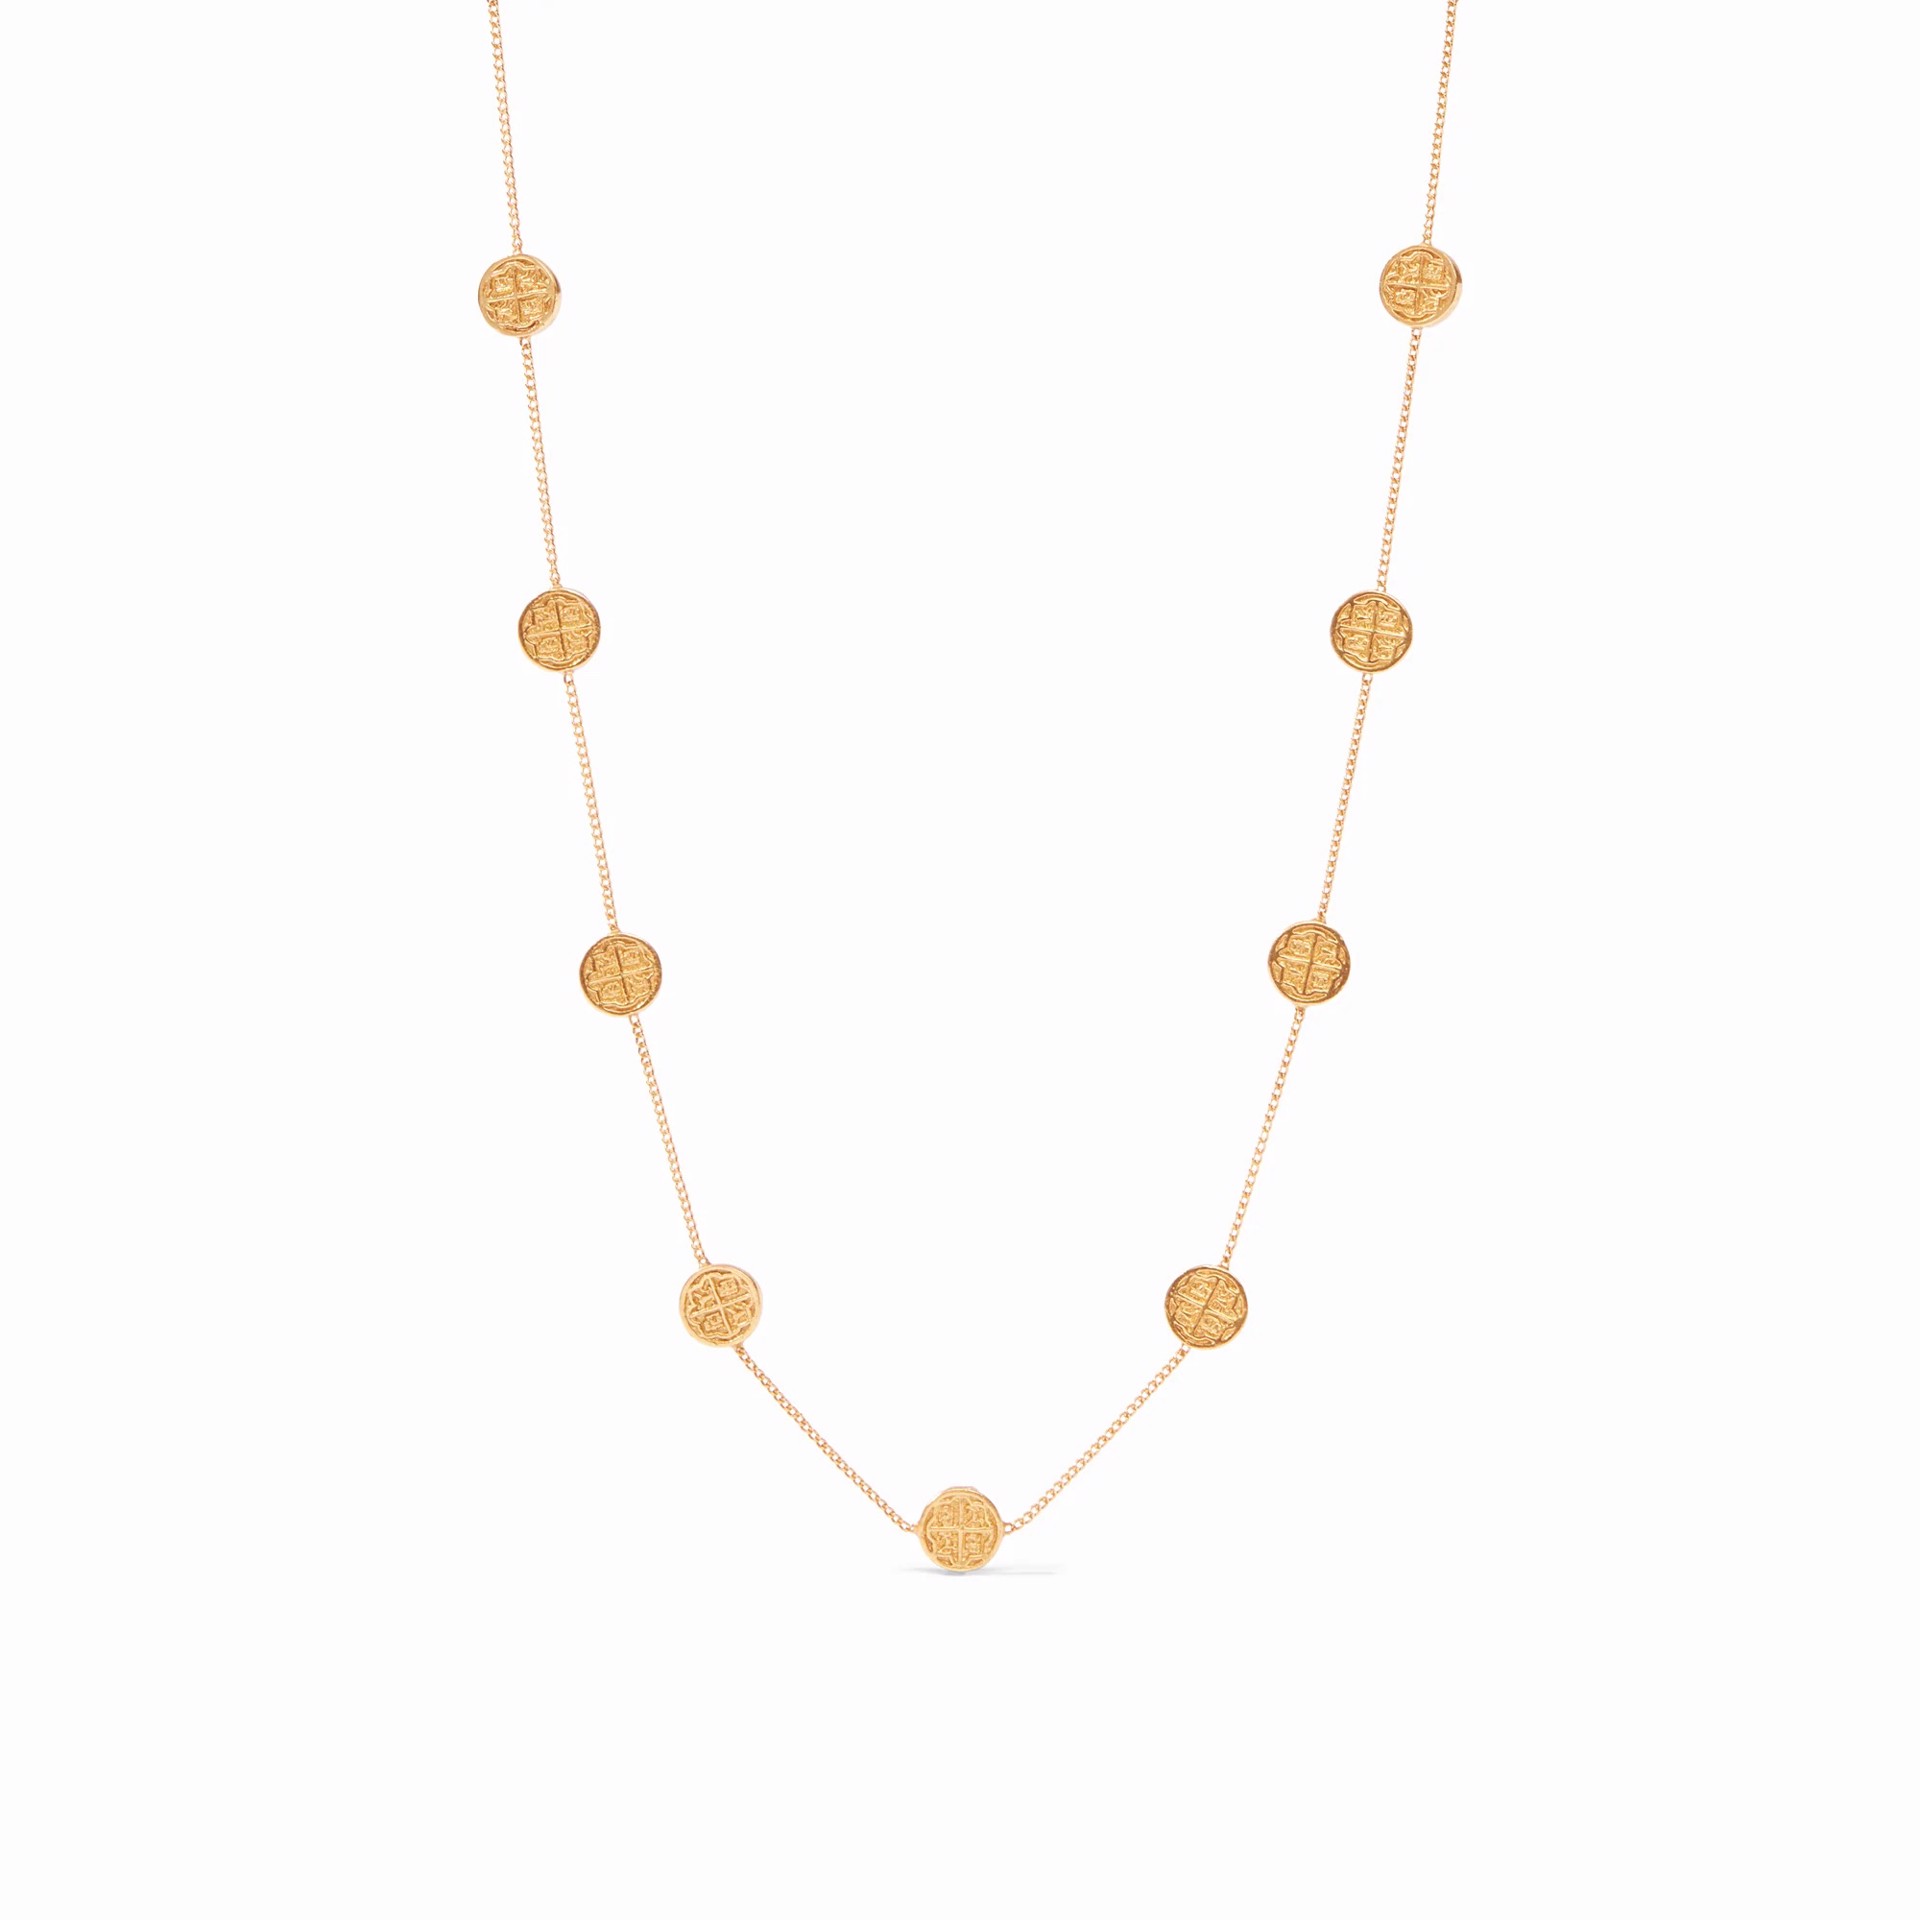 Valencia Delicate Station Necklace by Julie Vos